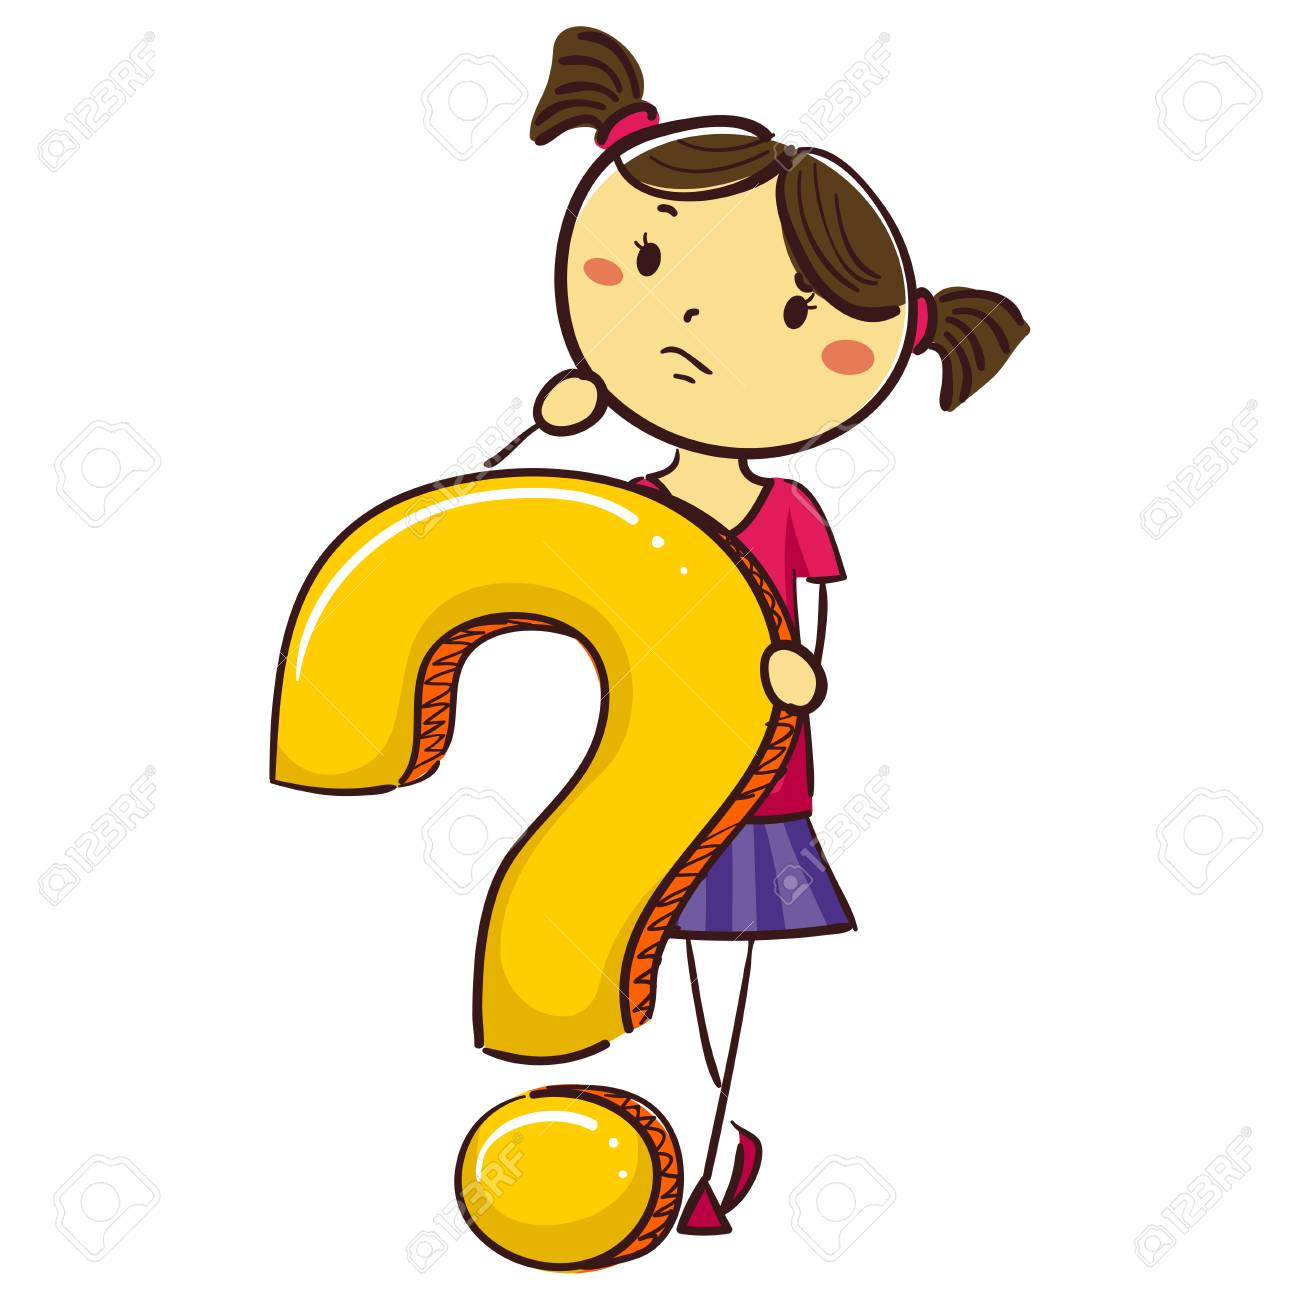 Free Question Mark Clipart boy question, Download Free Clip